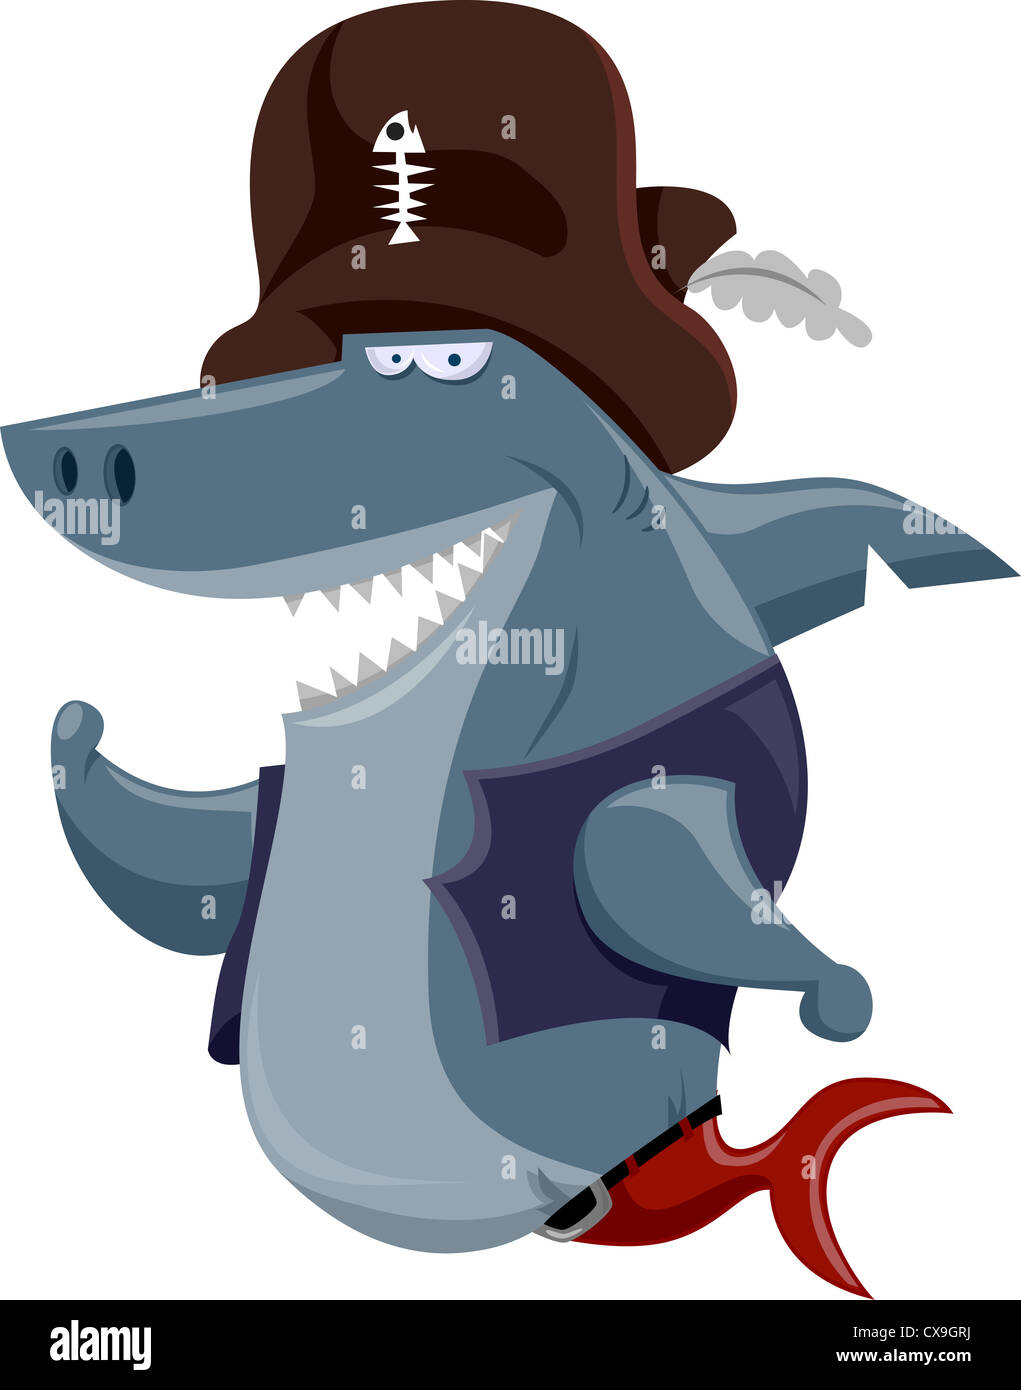 Illustration Featuring a Shark Dressed in a Pirate Costume Stock Photo